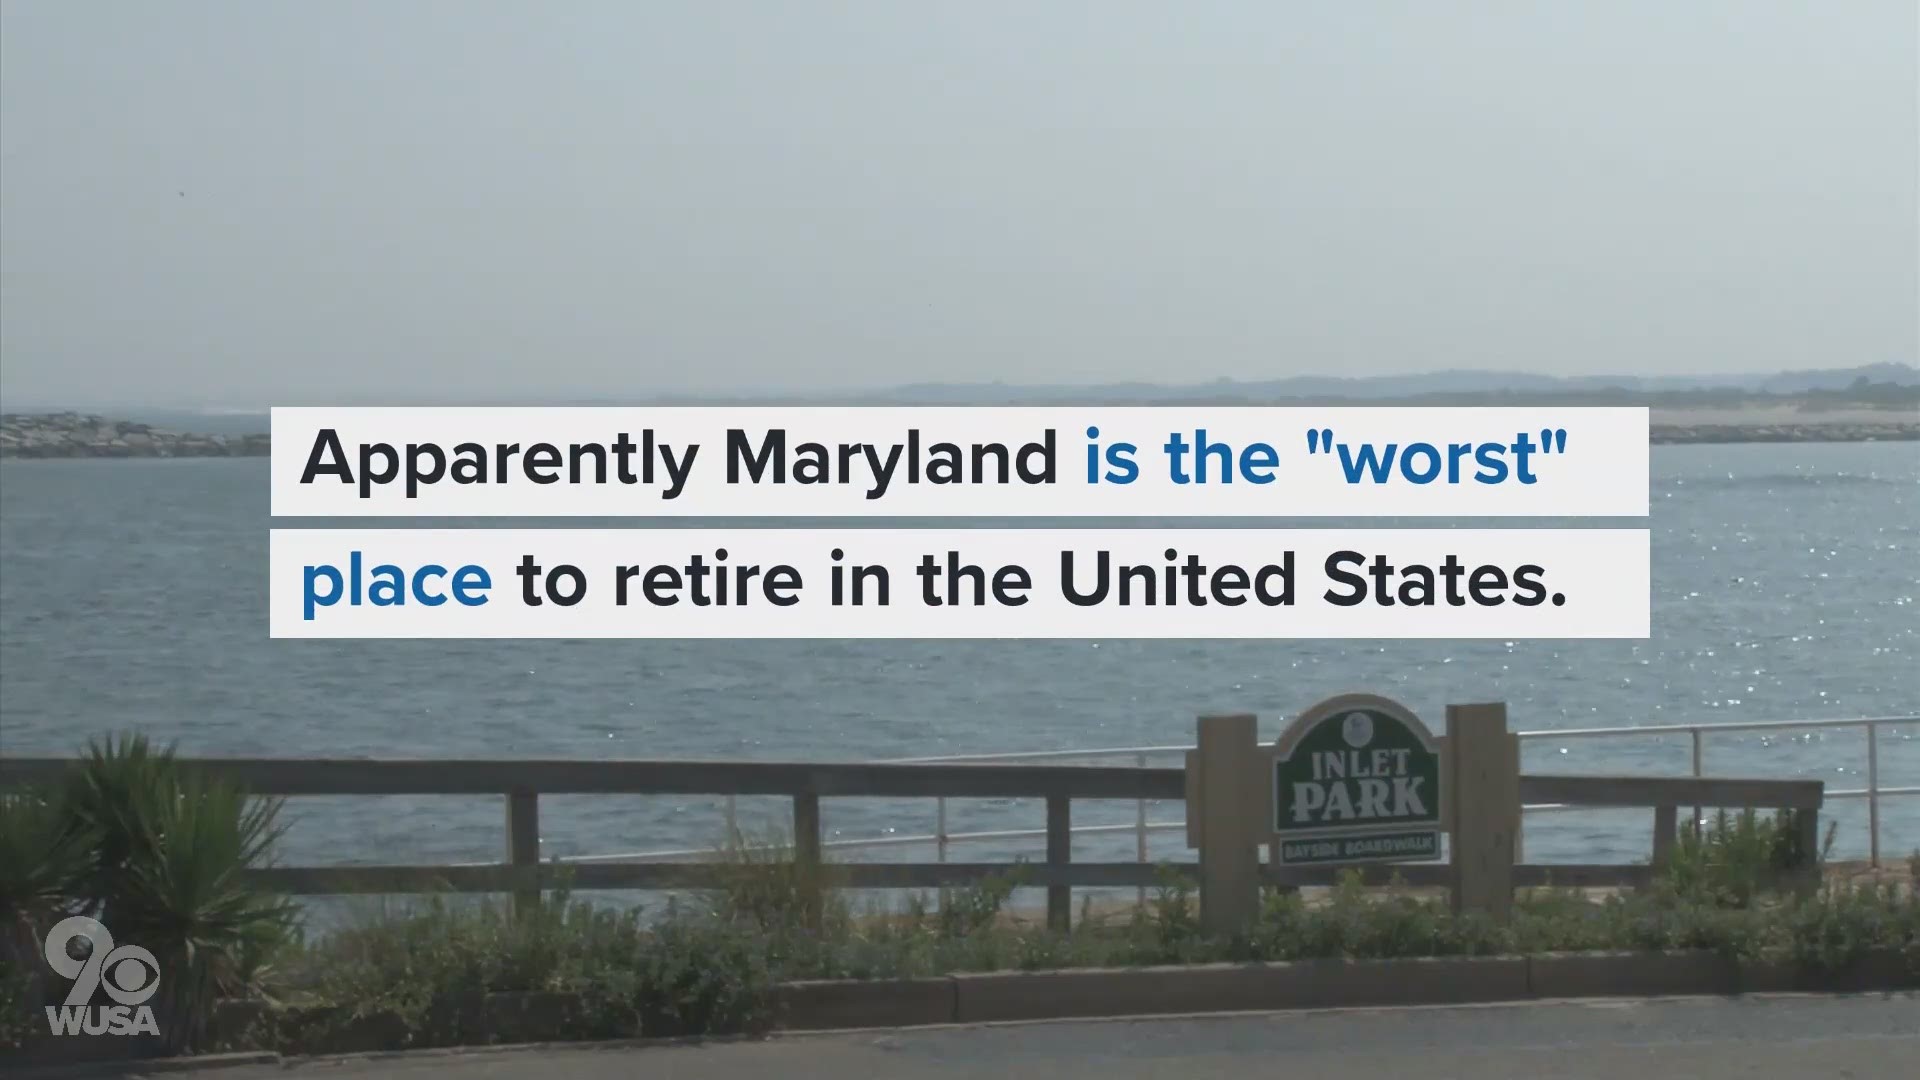 A new list from Moneywise notes the state’s great golfing, beaches, and proximity to major cities, but cited congested roads, surprise tornadoes and winter storms from the Atlantic as a reason not to retire there.